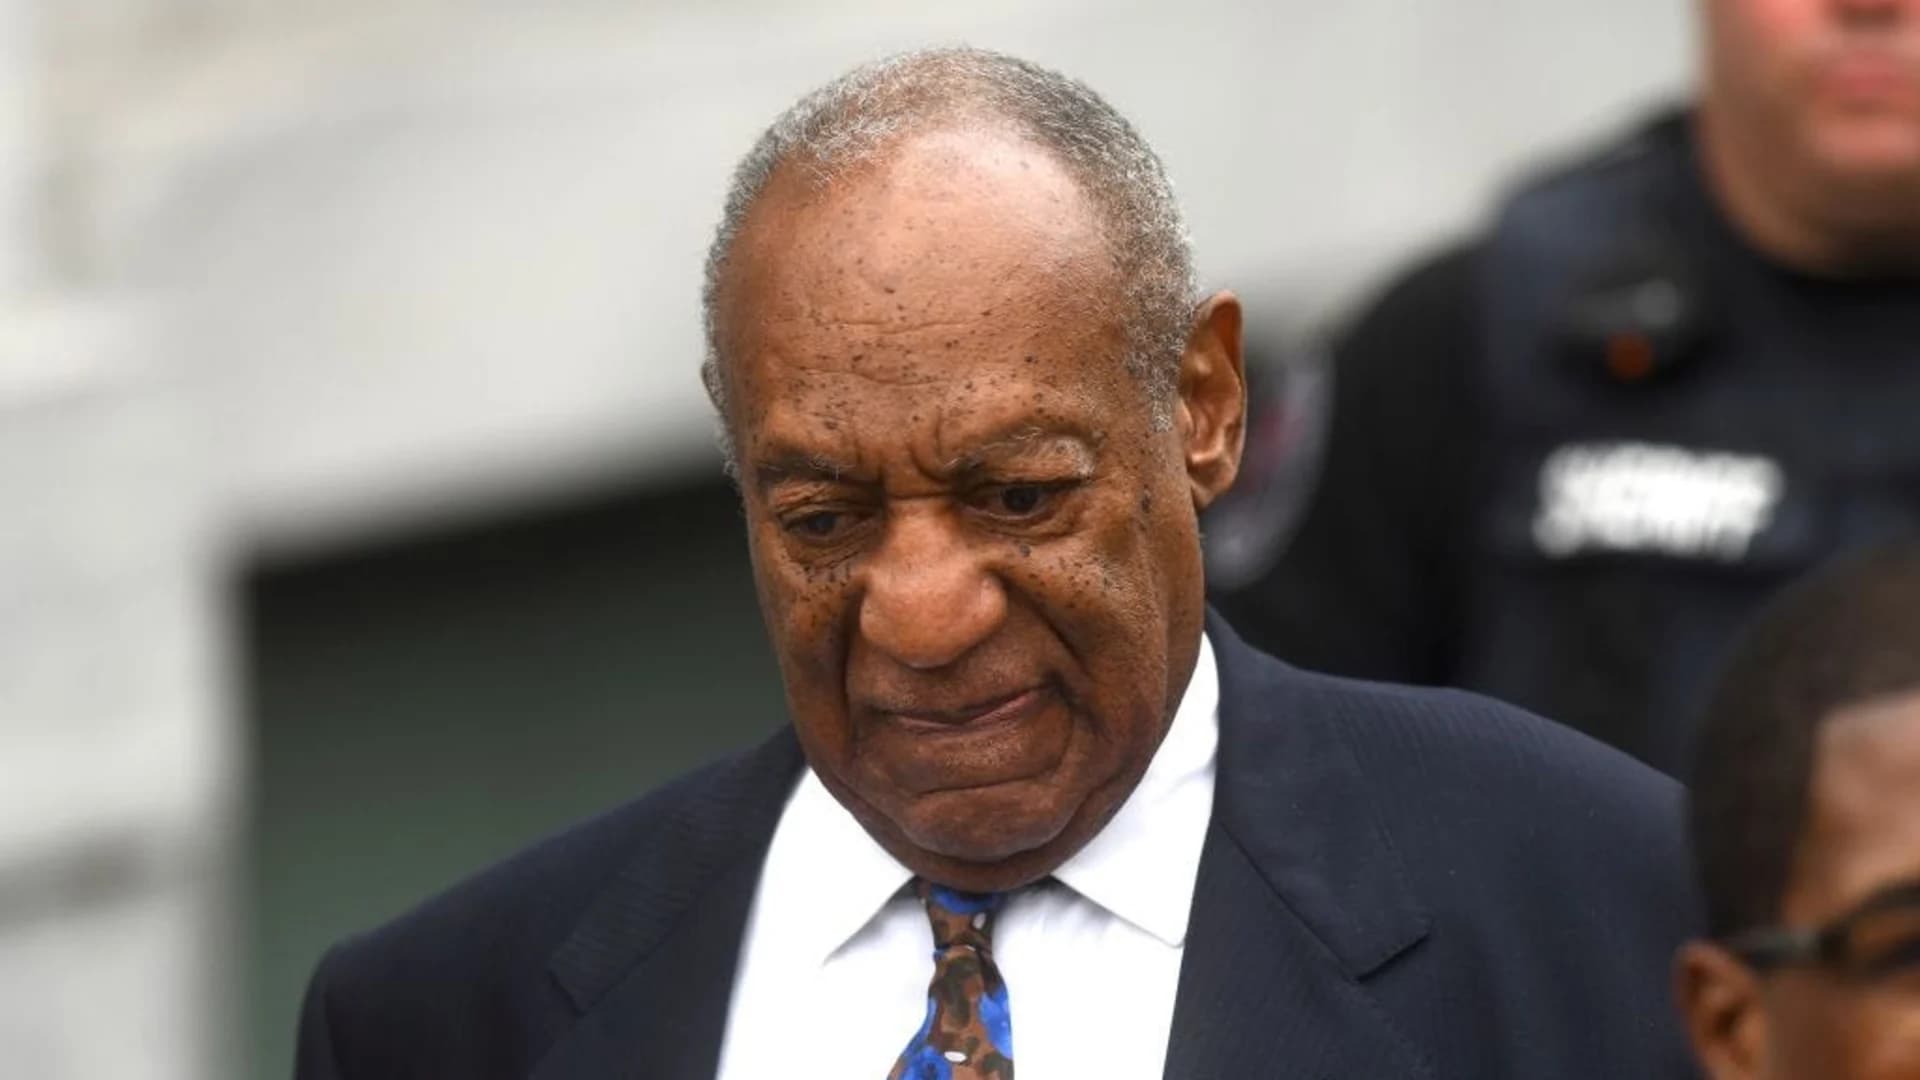 Bill Cosby sentenced to 3 to 10 years in prison in sex case